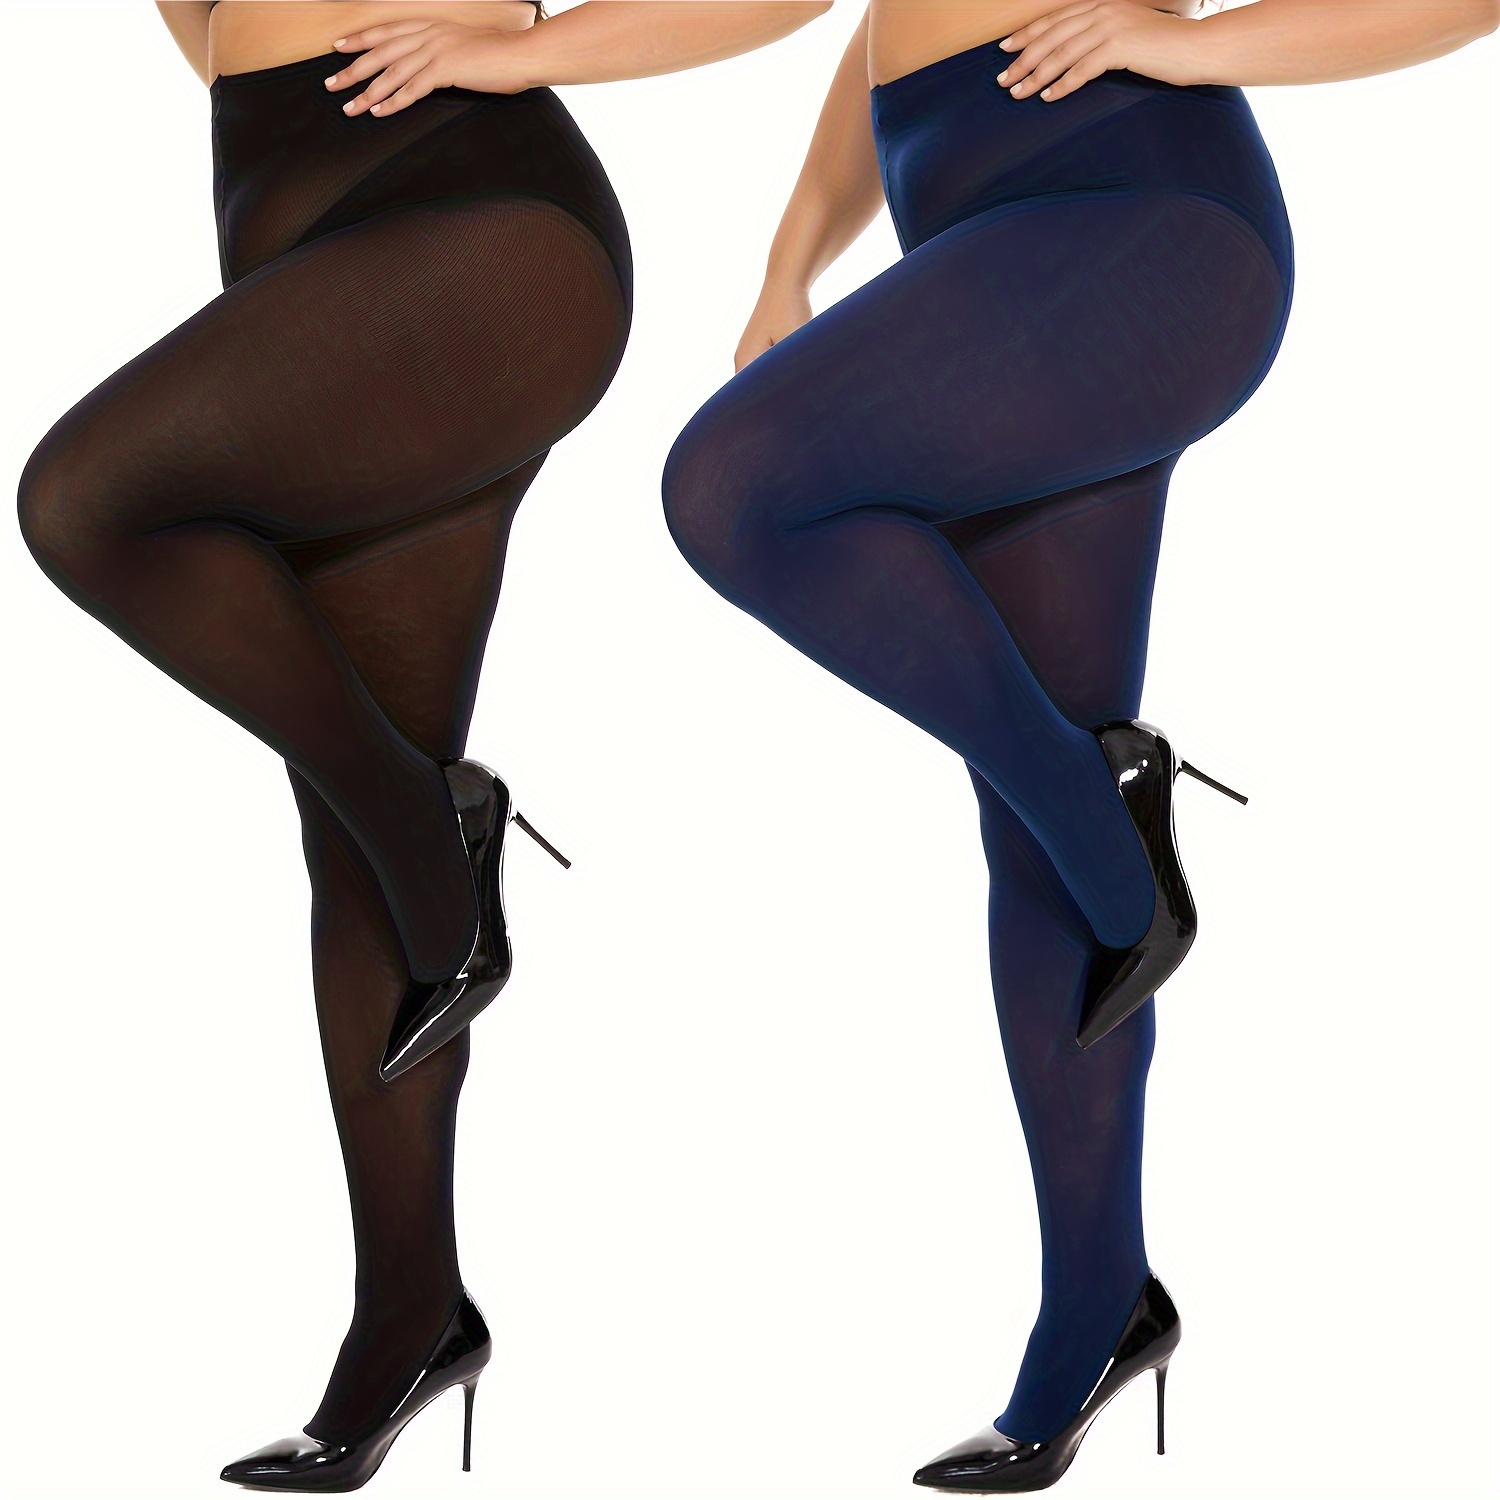 2 Pairs of Appearance 40 Denier Semi-Opaque Tights 